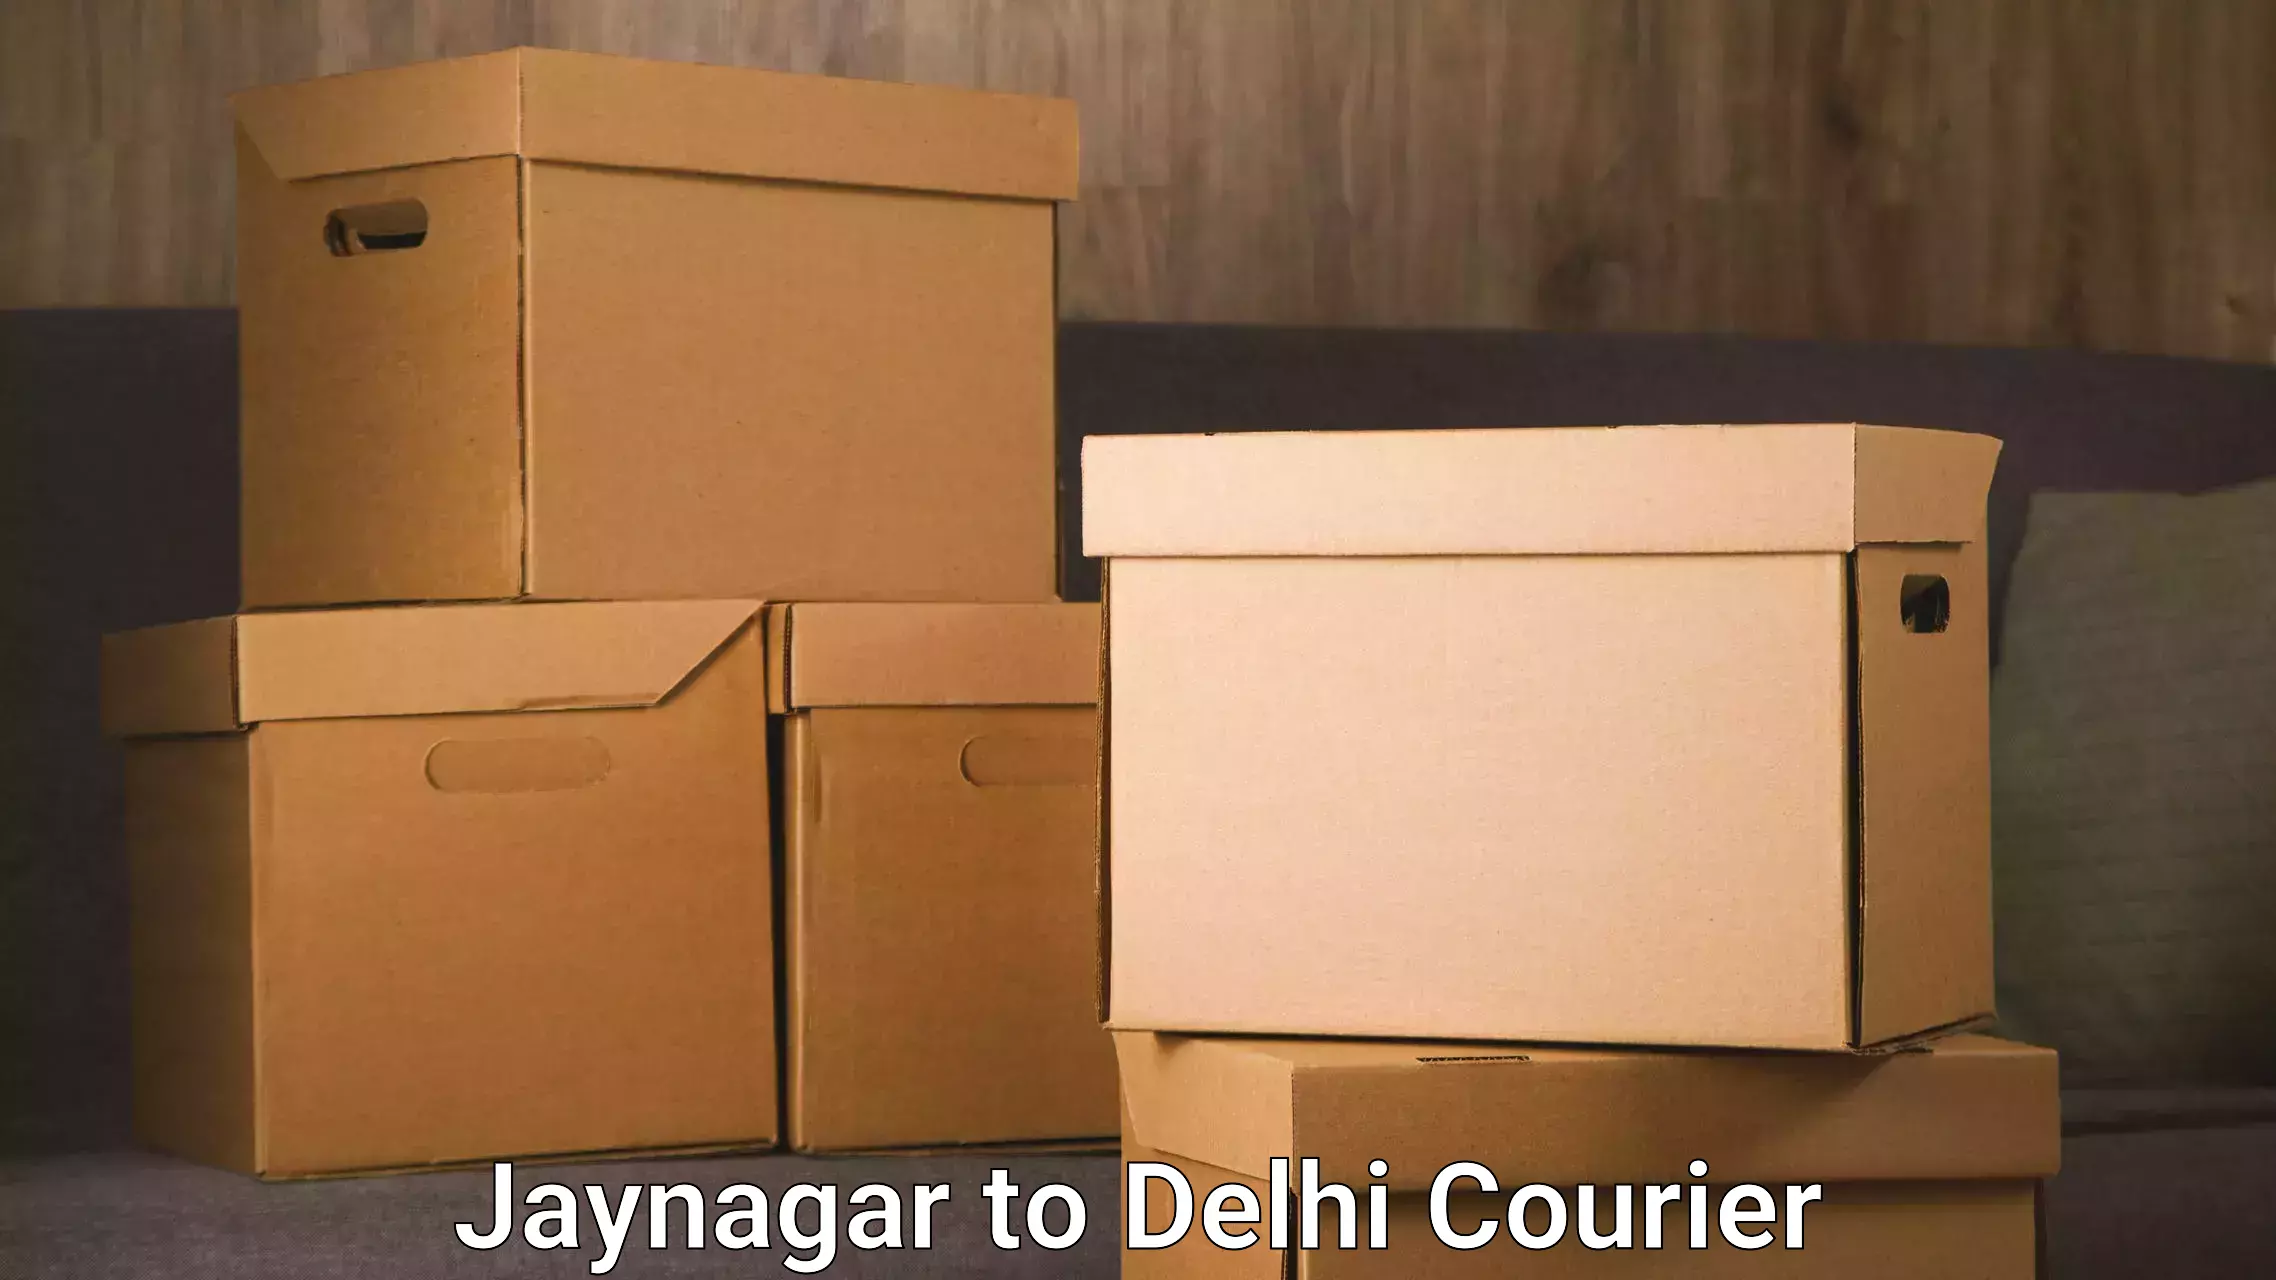 Trusted relocation experts Jaynagar to Lodhi Road